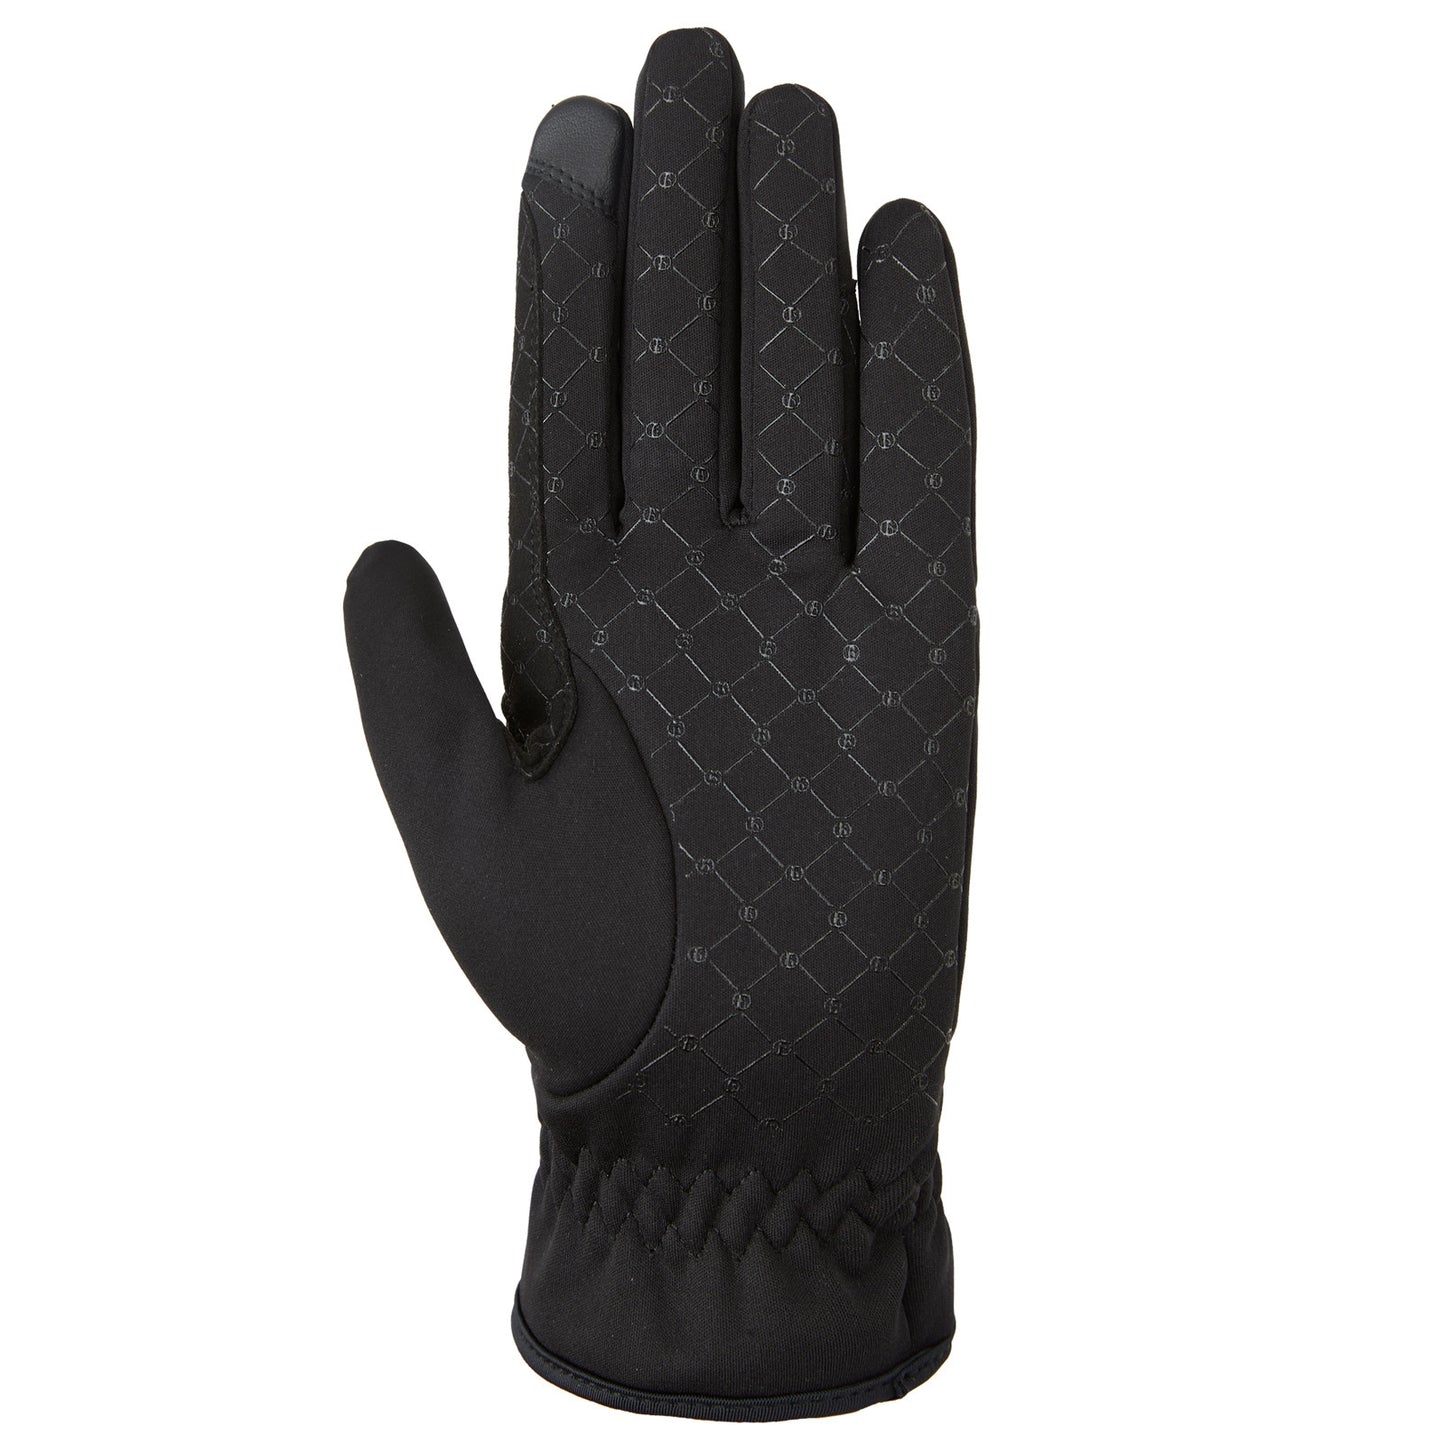 Laura's Loft || Eliot Cold Weather Riding Glove size 9 Only